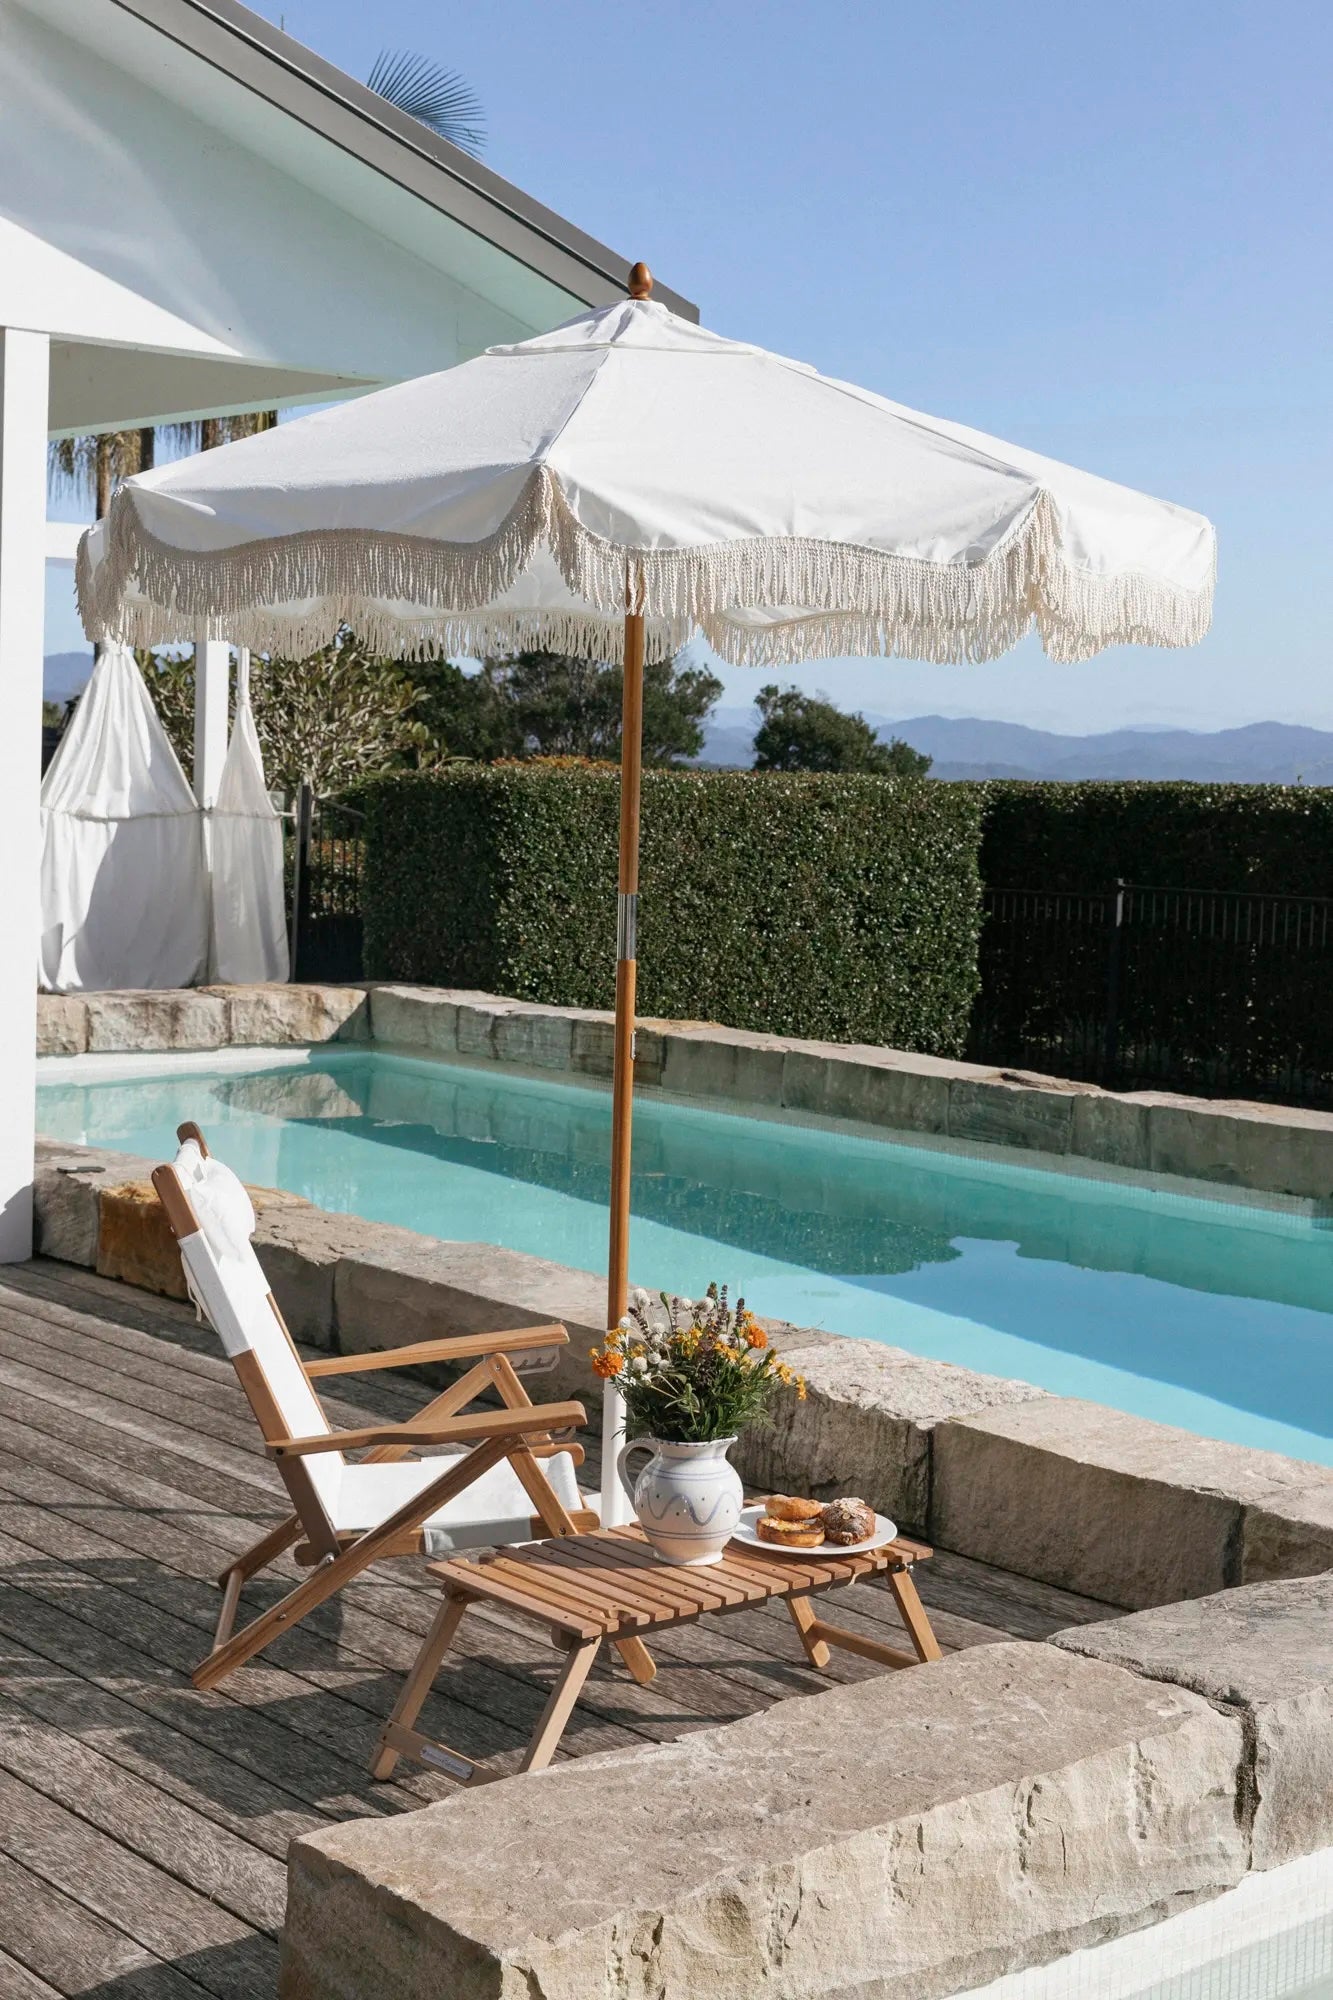 White market umbrella and tommy chair poolside